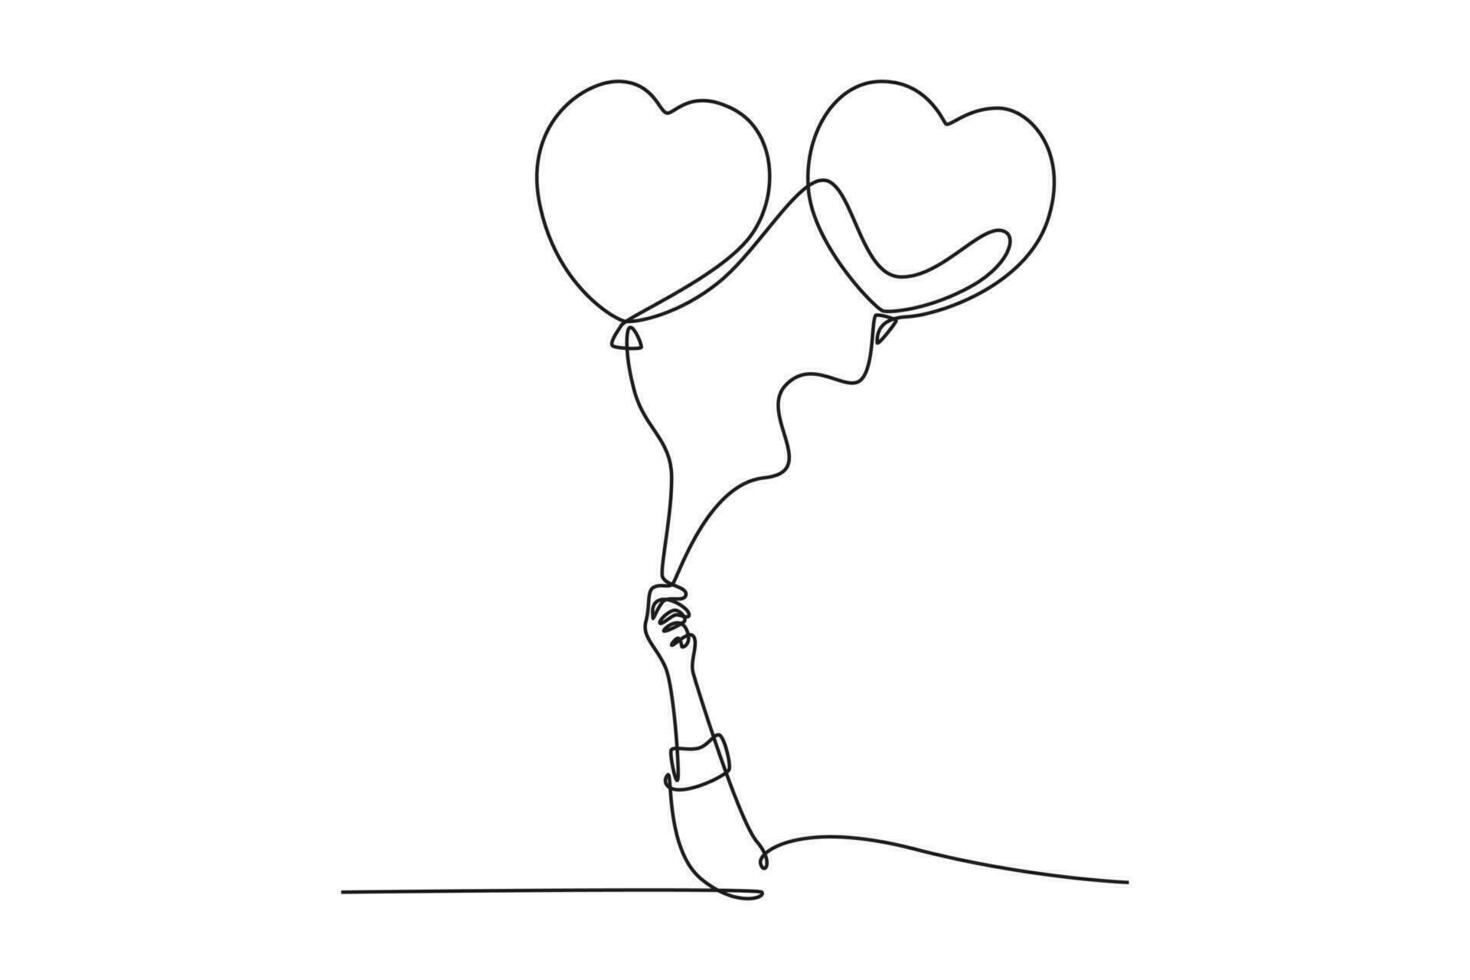 Continuous one line drawing young happy beautiful girl holding a couple cute heart shaped balloon tightly. Romantic wedding invitation card concept. Single line draw design vector graphic illustration